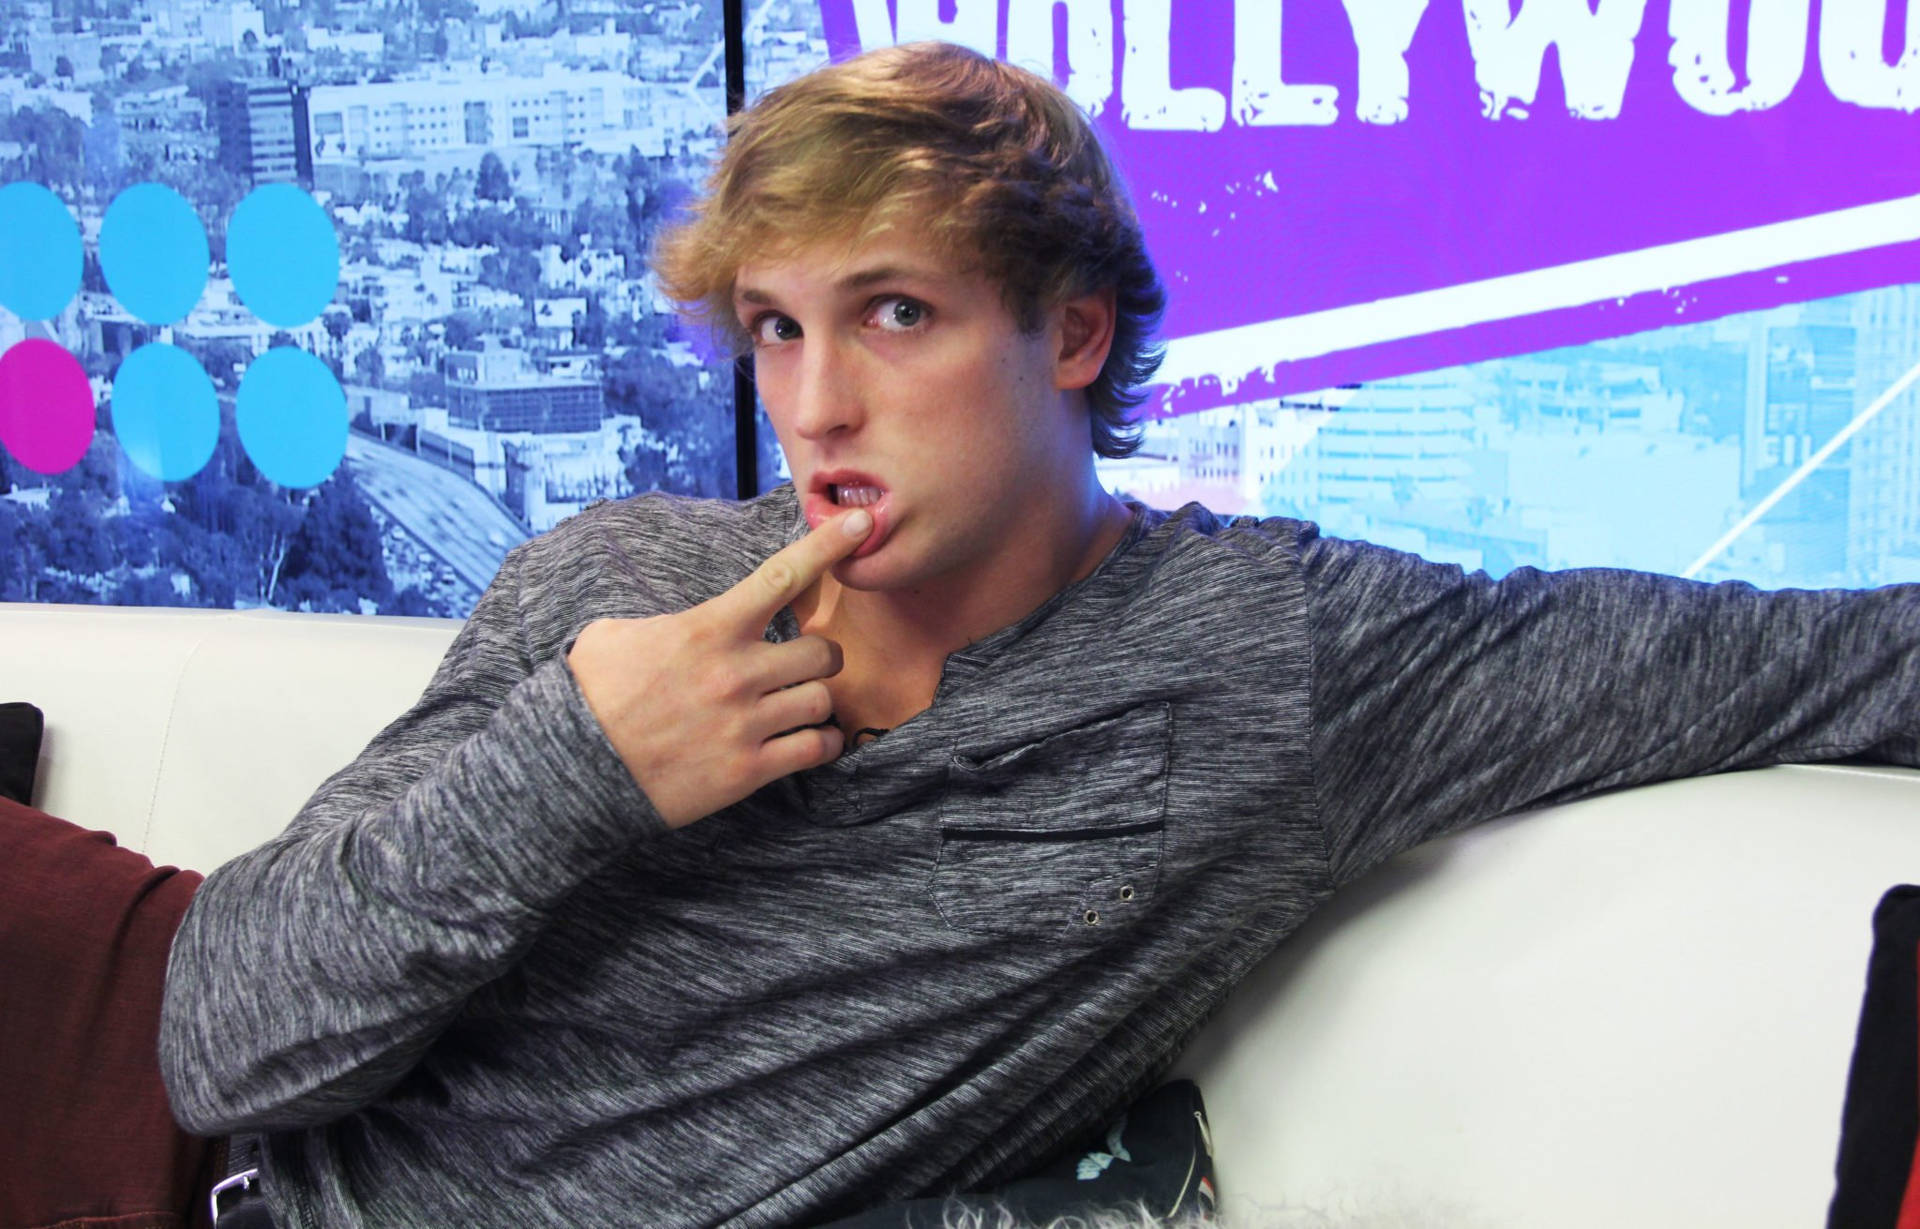 Logan Paul Being Witty And Playful Wallpaper